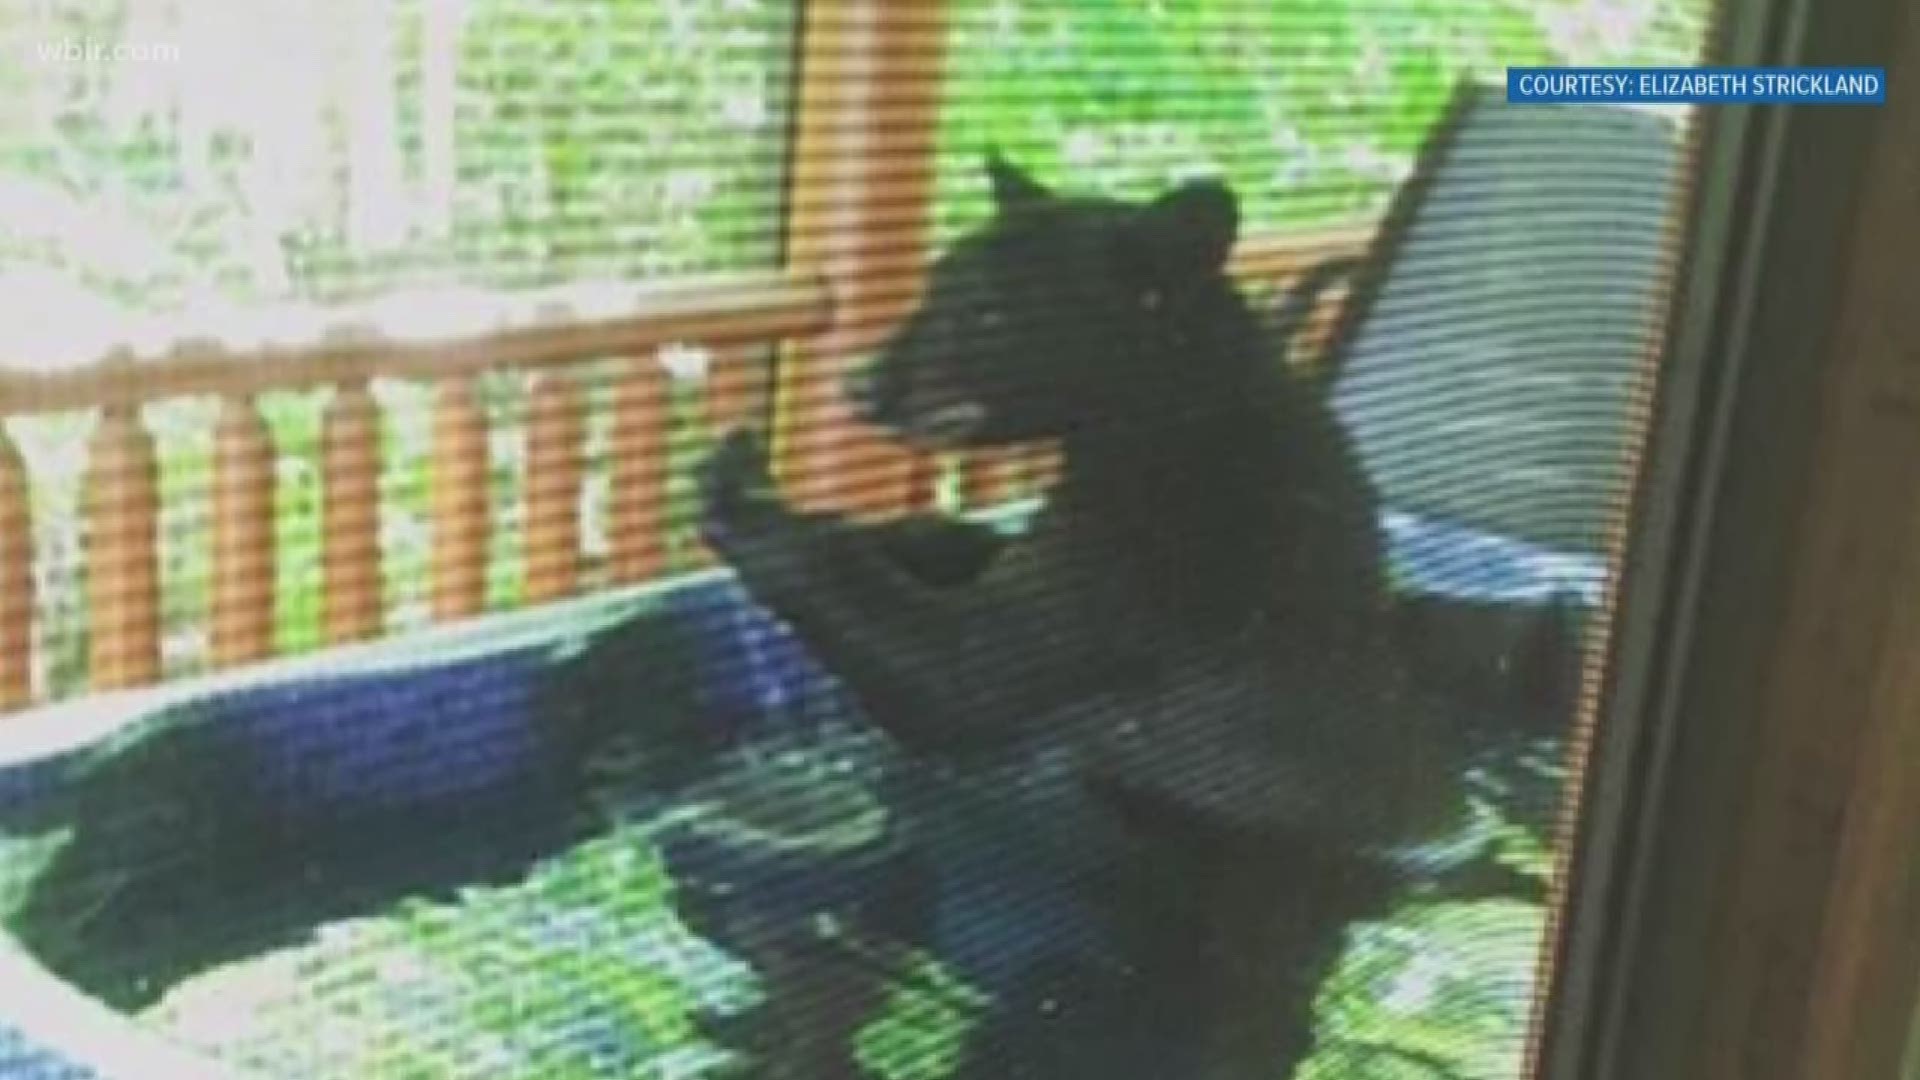 The bear hopped over the railing of a patio, then got into the water for a little dip!